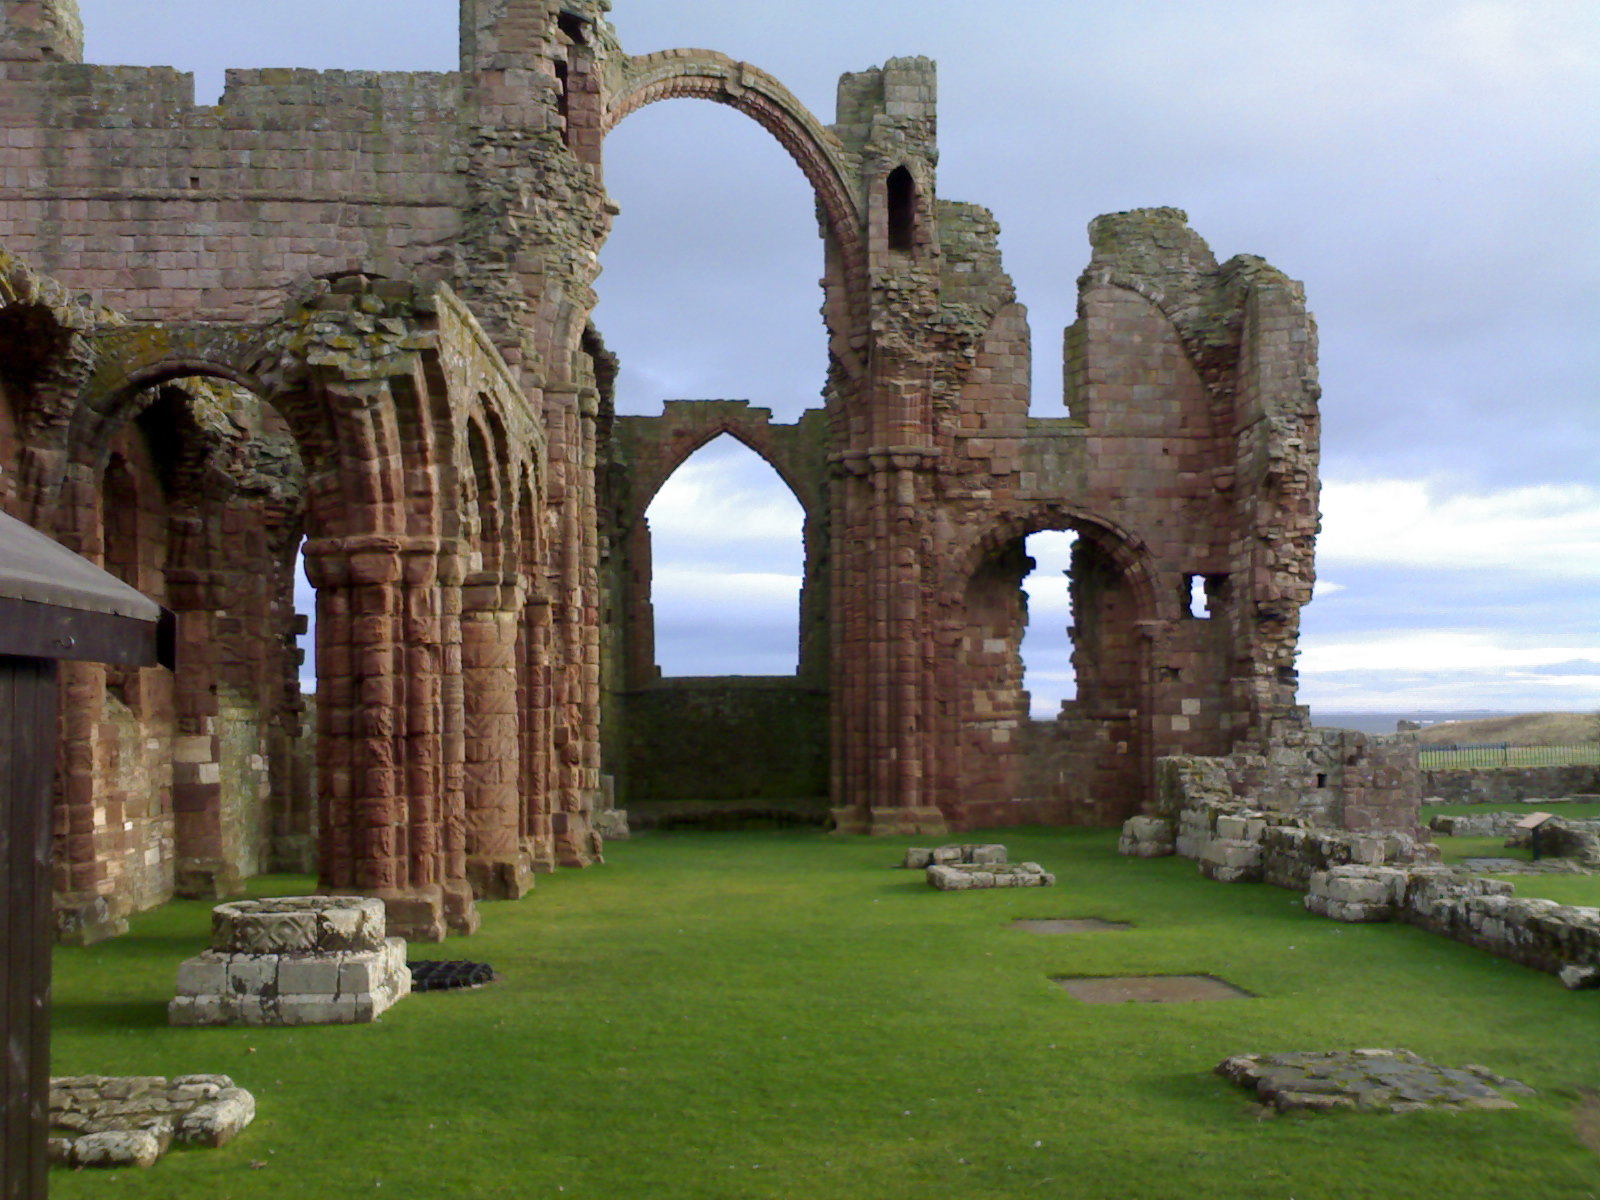 The ruins of the Abbey on Holy Island.